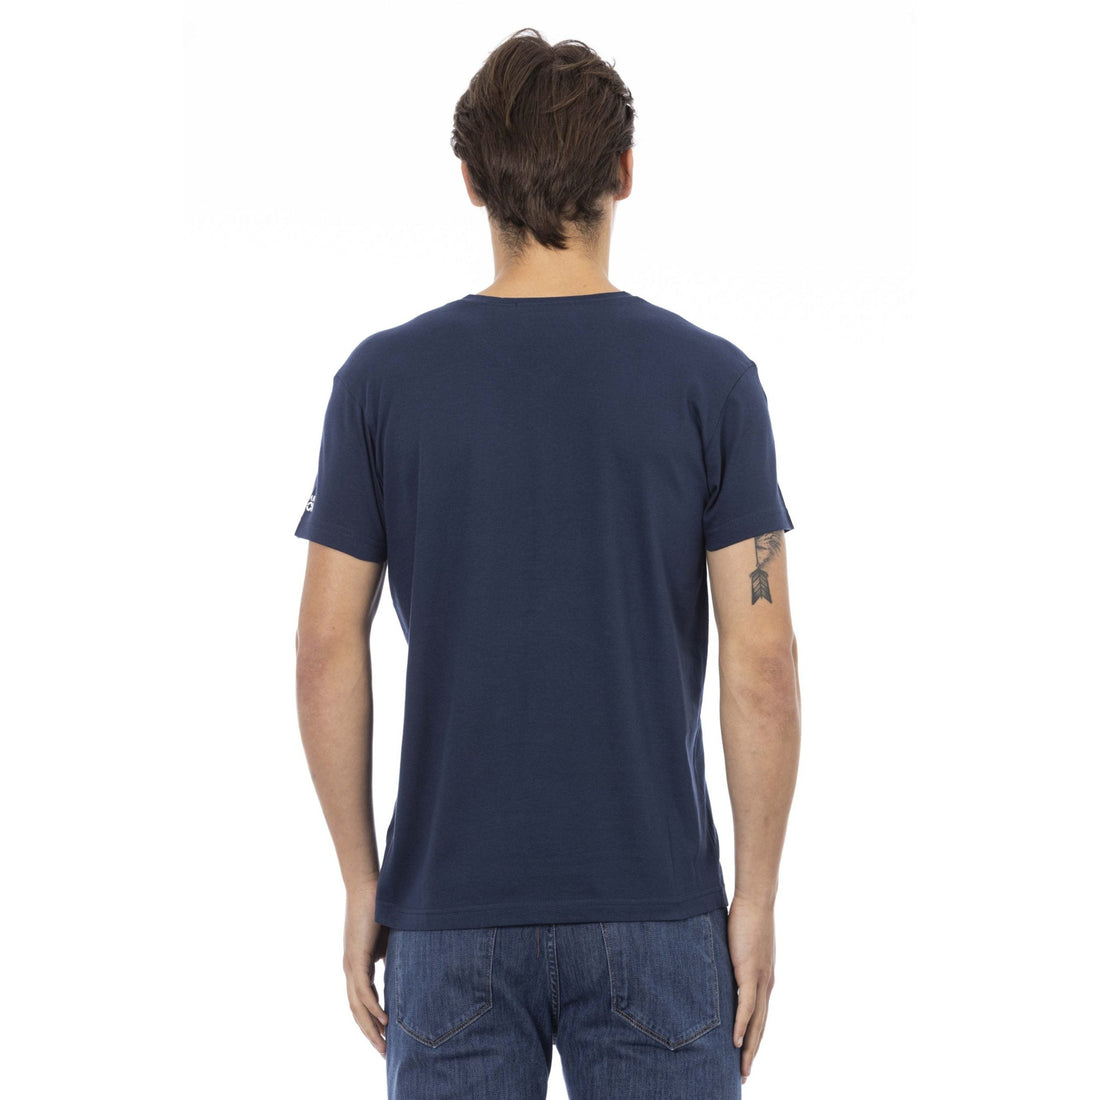 Trussardi Action Chic Blue V-Neck Tee with Bold Front Print